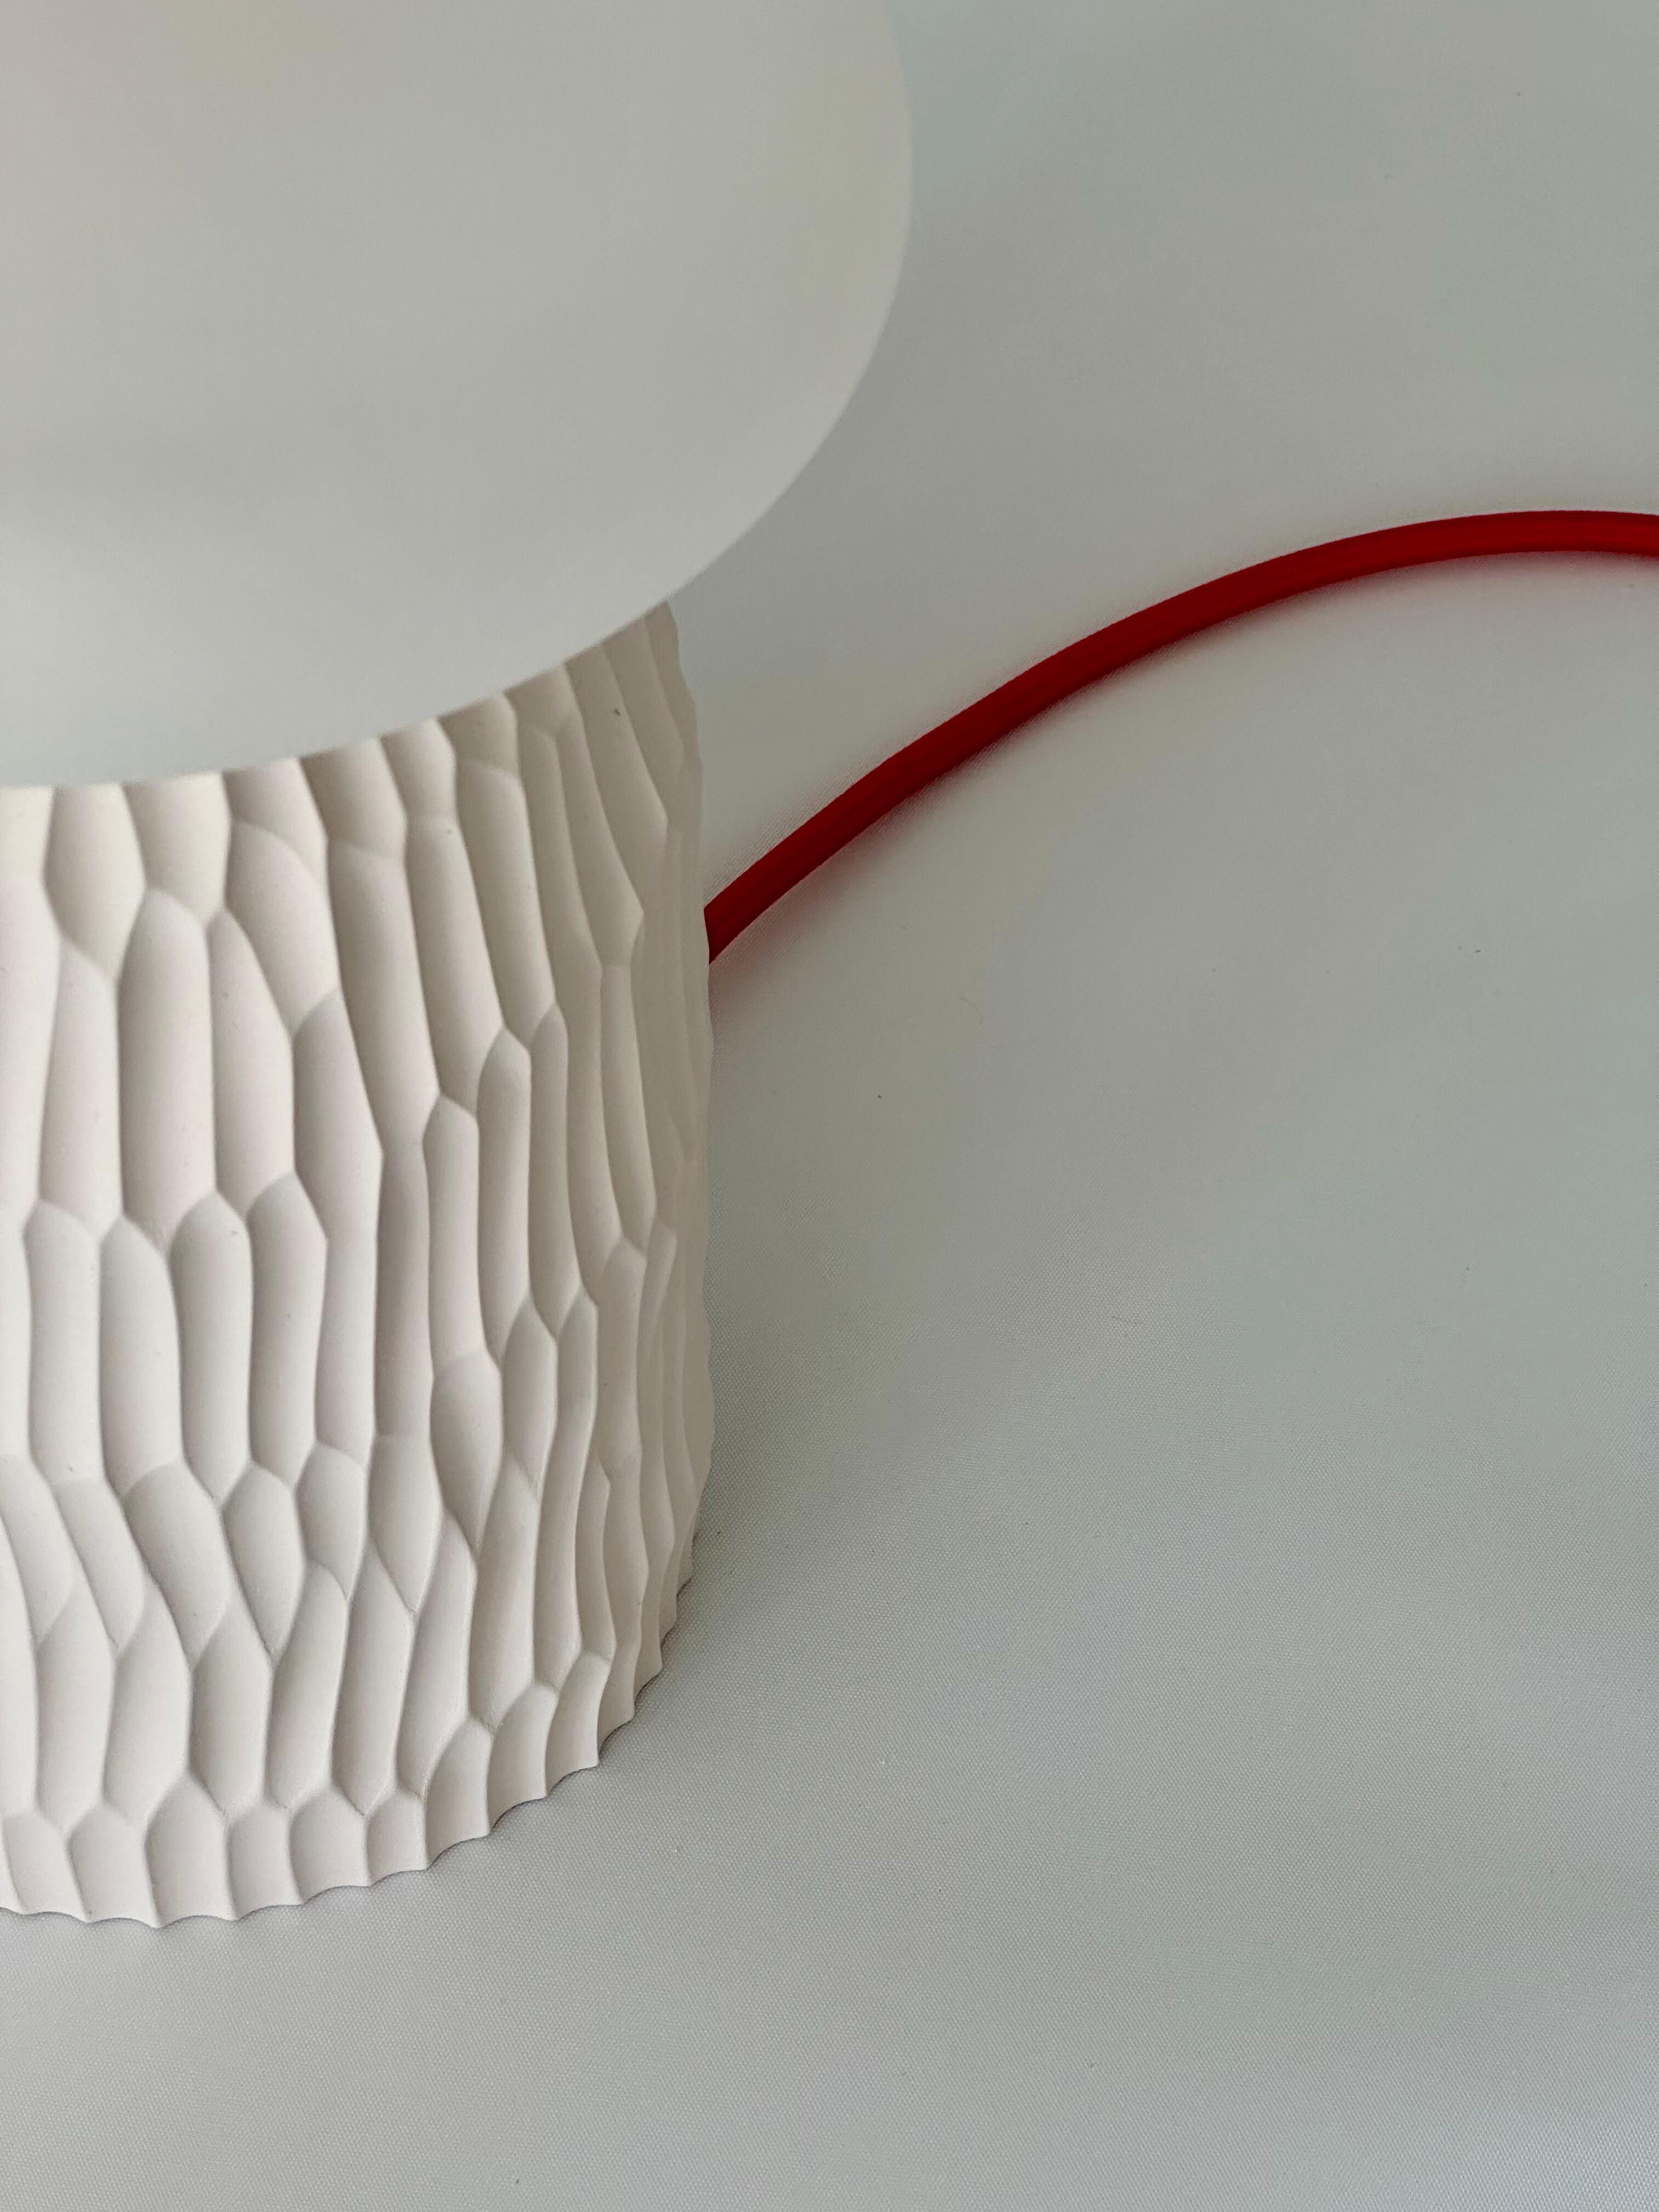 The lamp is a simple and minimalist hand formed ceramic table lamp without a lampshade. Its unique textural base is hand carved in a signature design, with a distinct natural grain from its clay origins. 
It has been designed to create a unique